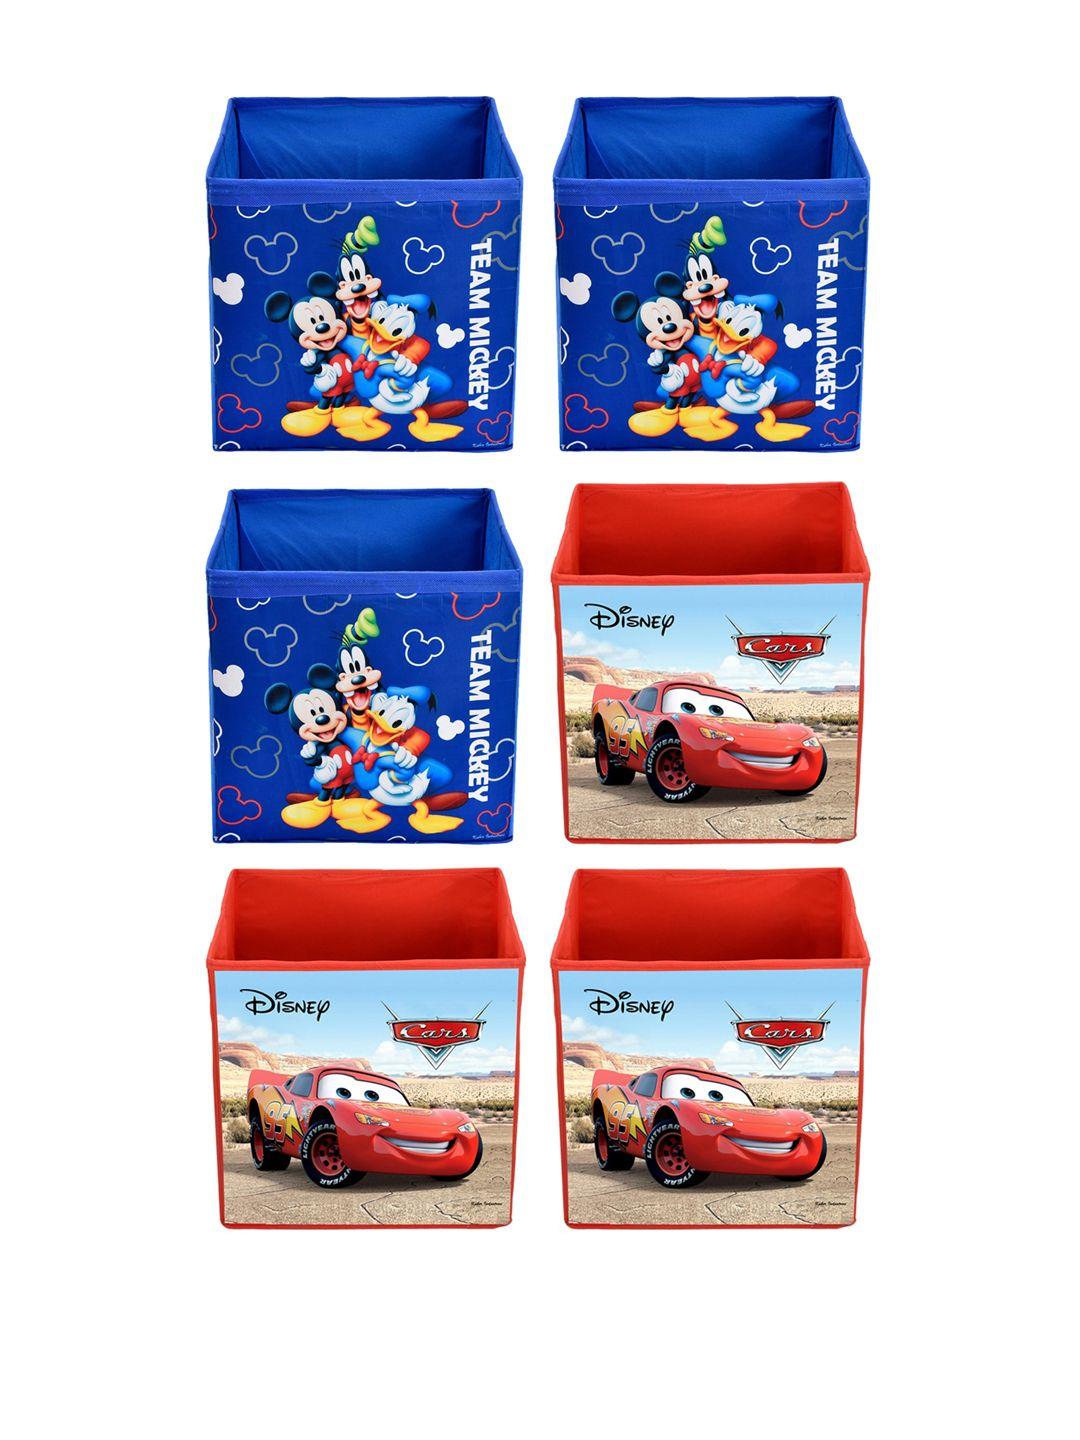 kuber industries set of 6 disney printed foldable storage boxes with handles